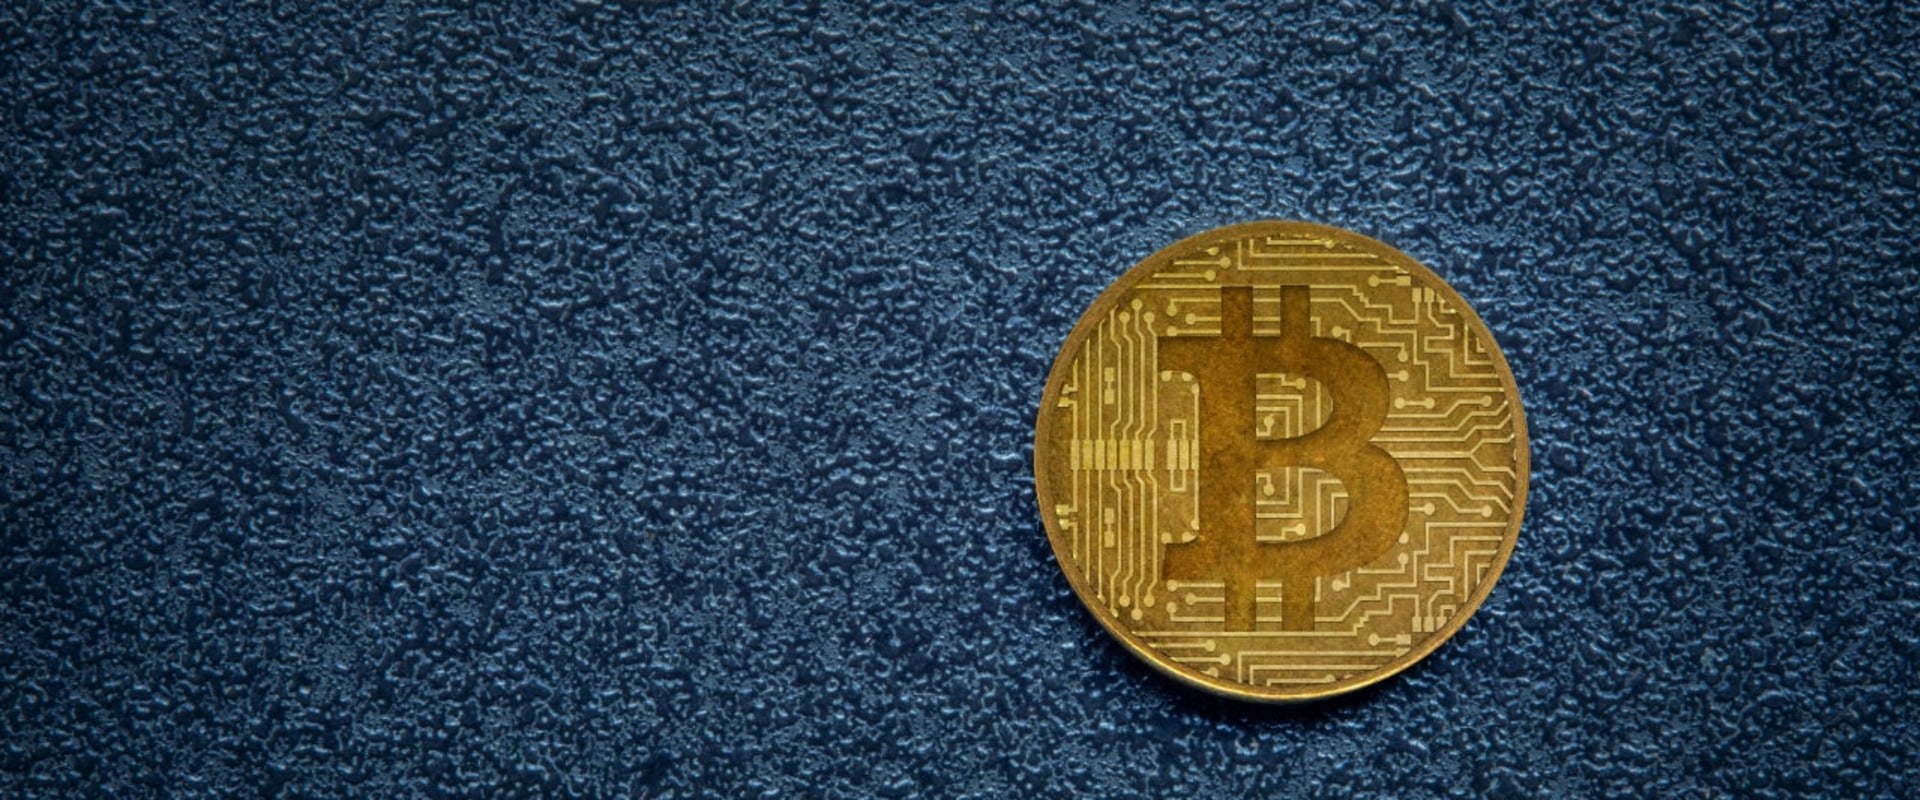 Are bitcoin transactions anonymous or pseudonymous?